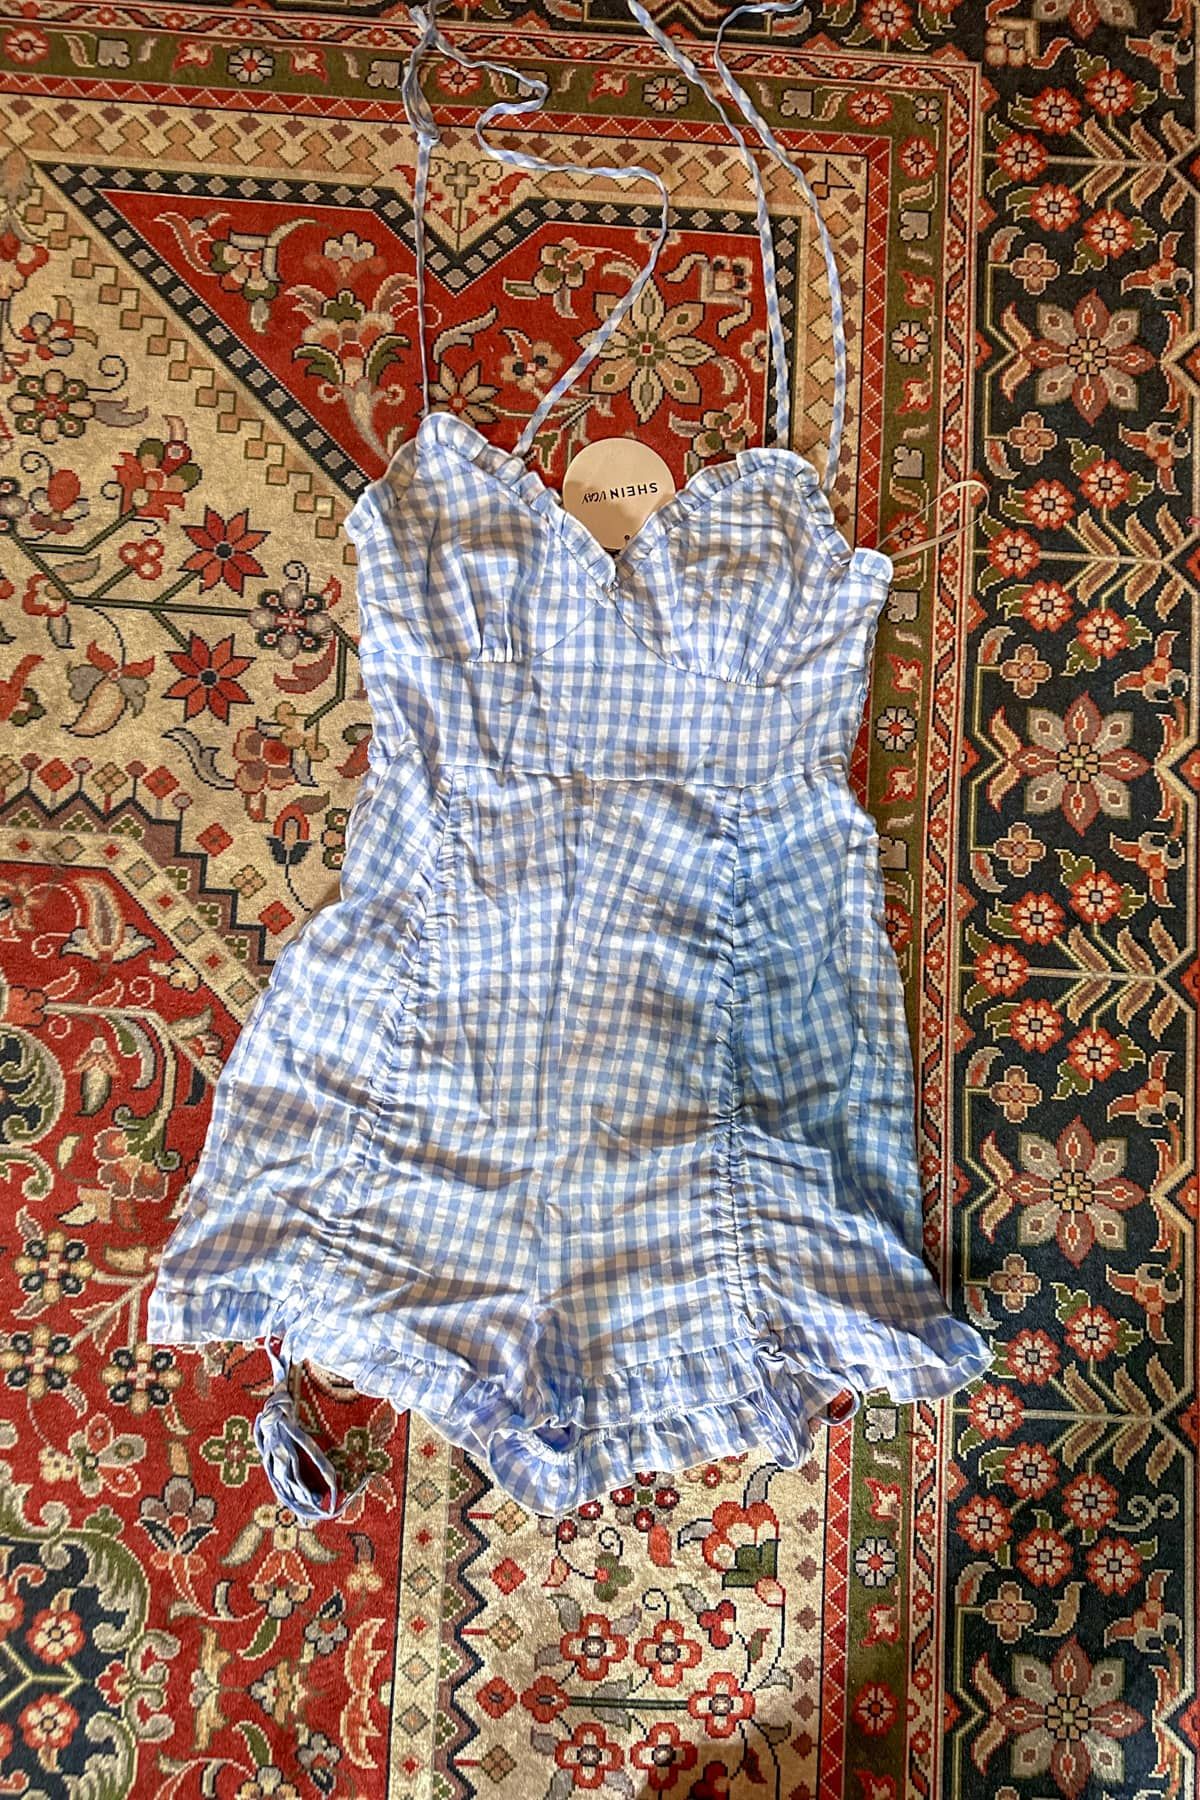 A blue and white gingham romper lying flat on a red, white, and blue oriental rug.